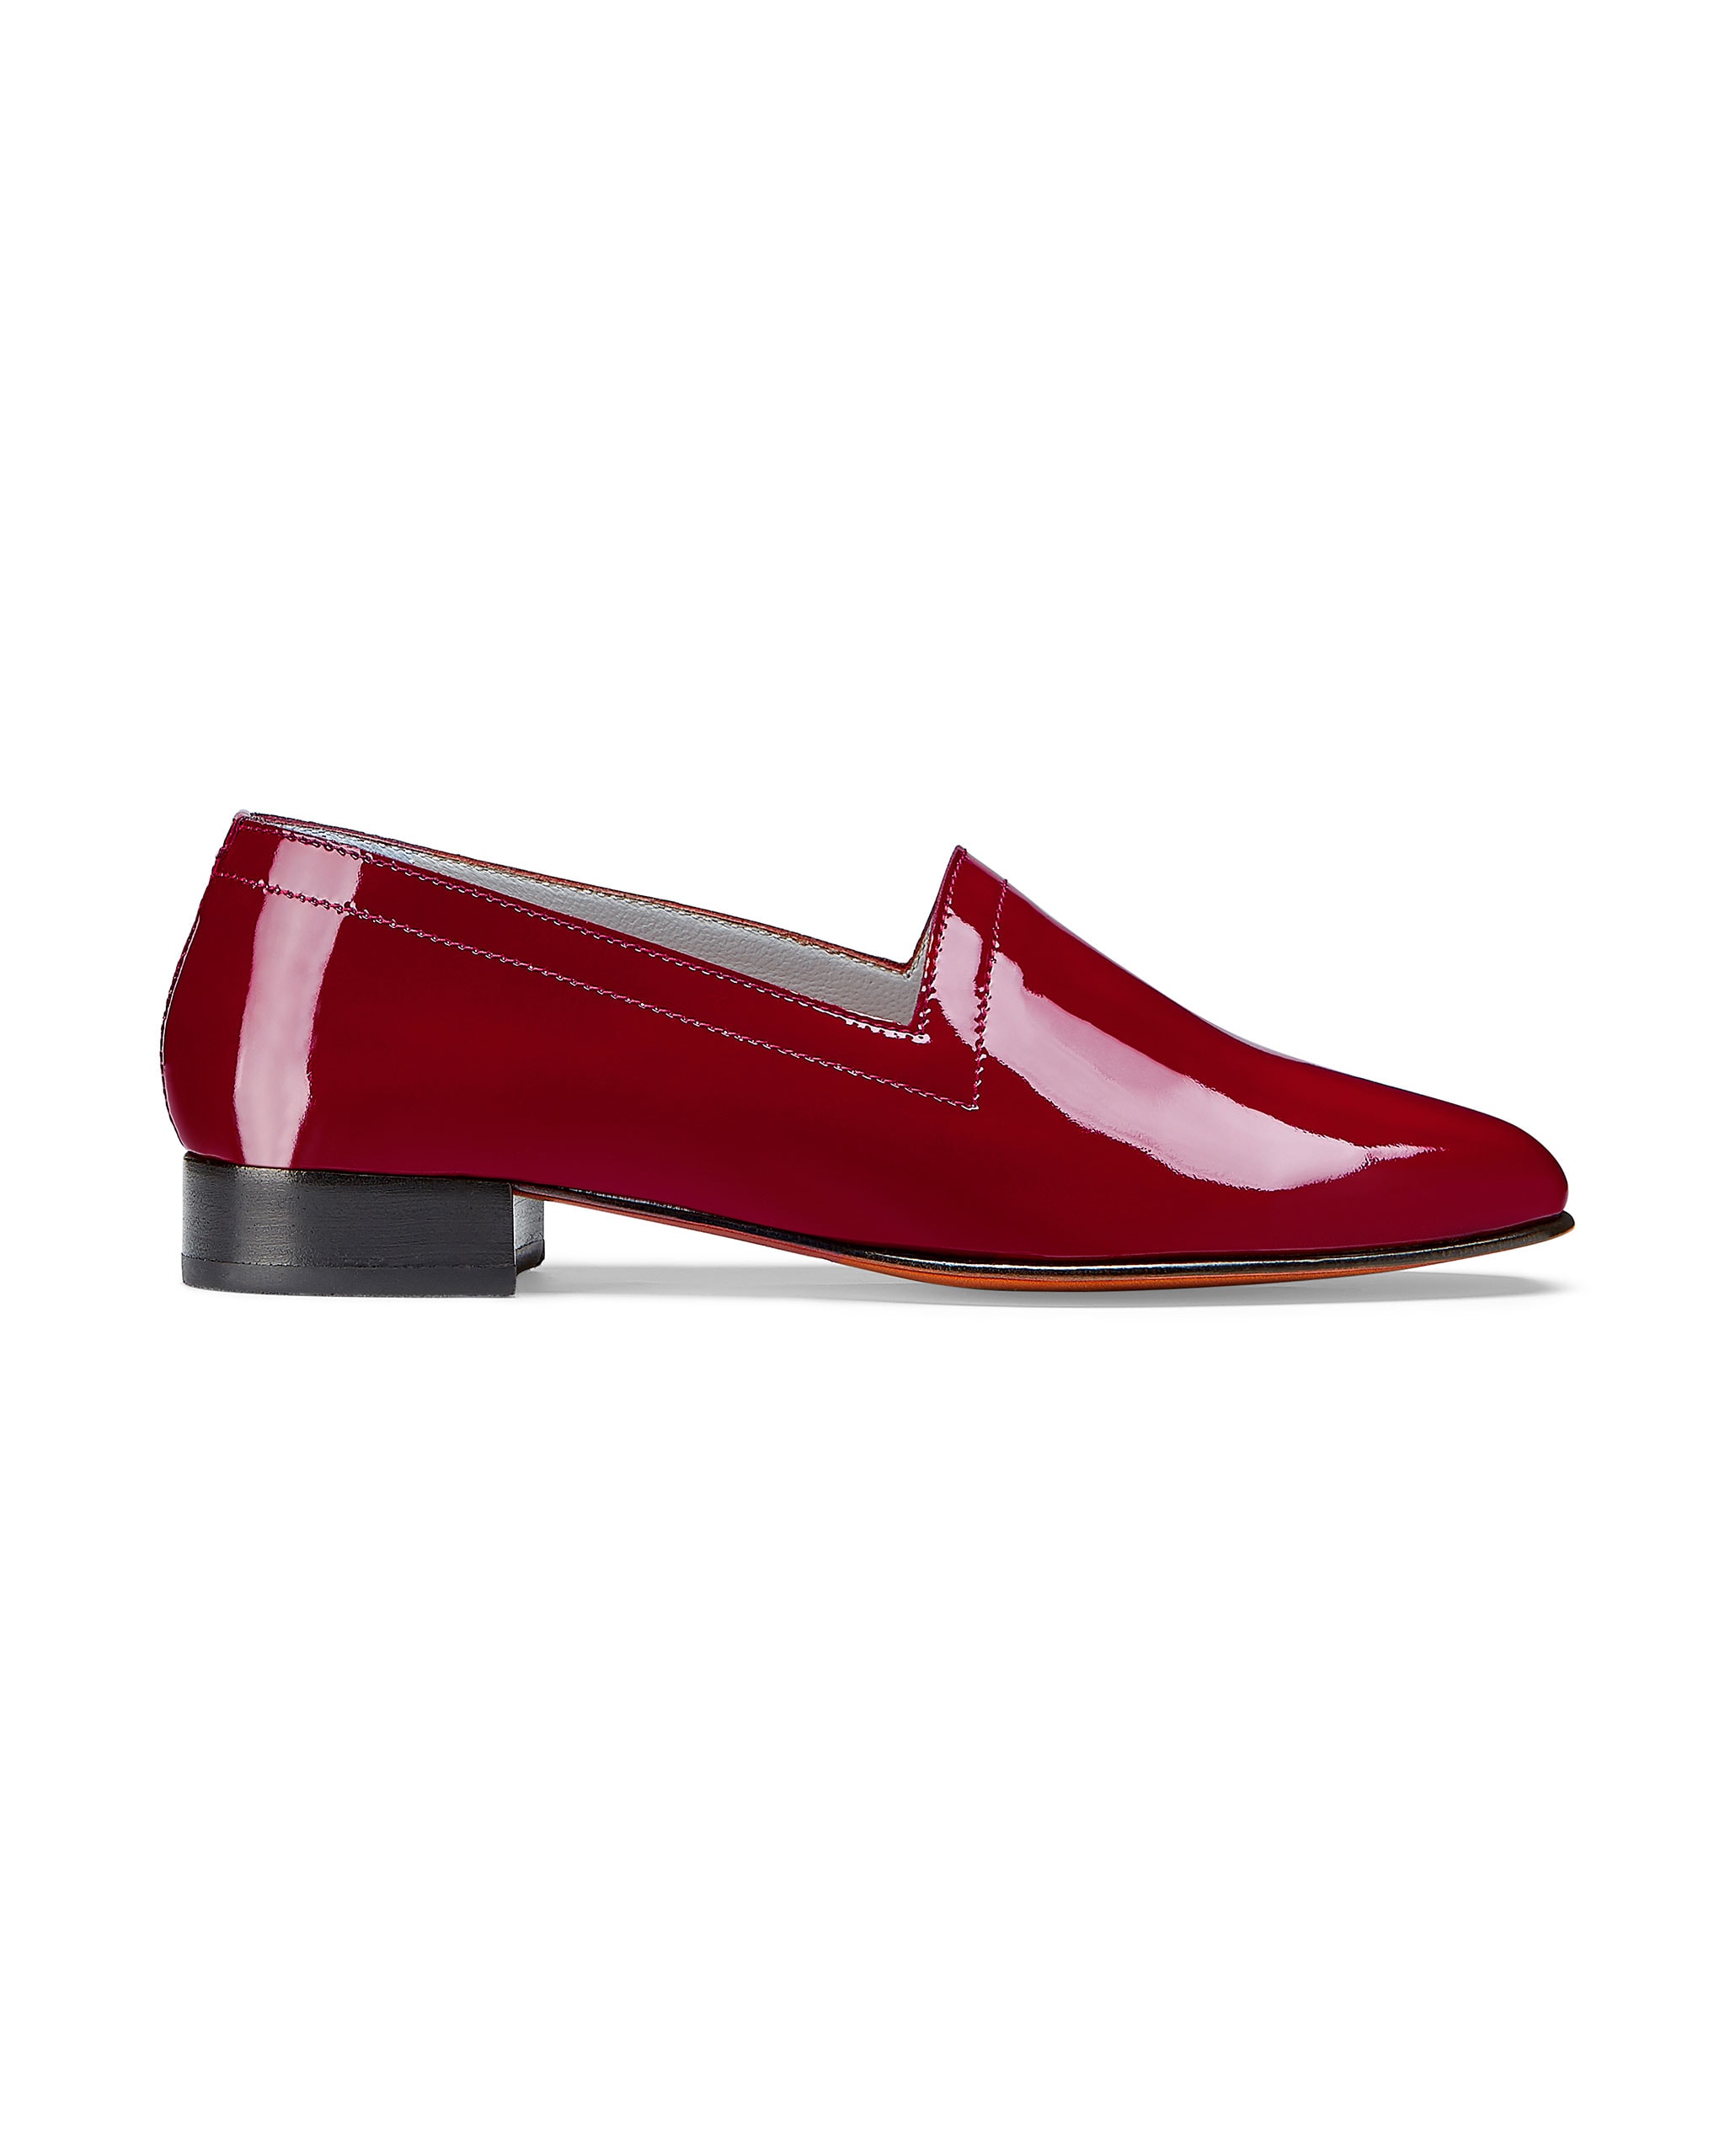 Ops&Ops No11 Crimson patent leather block-heel loafers, side view